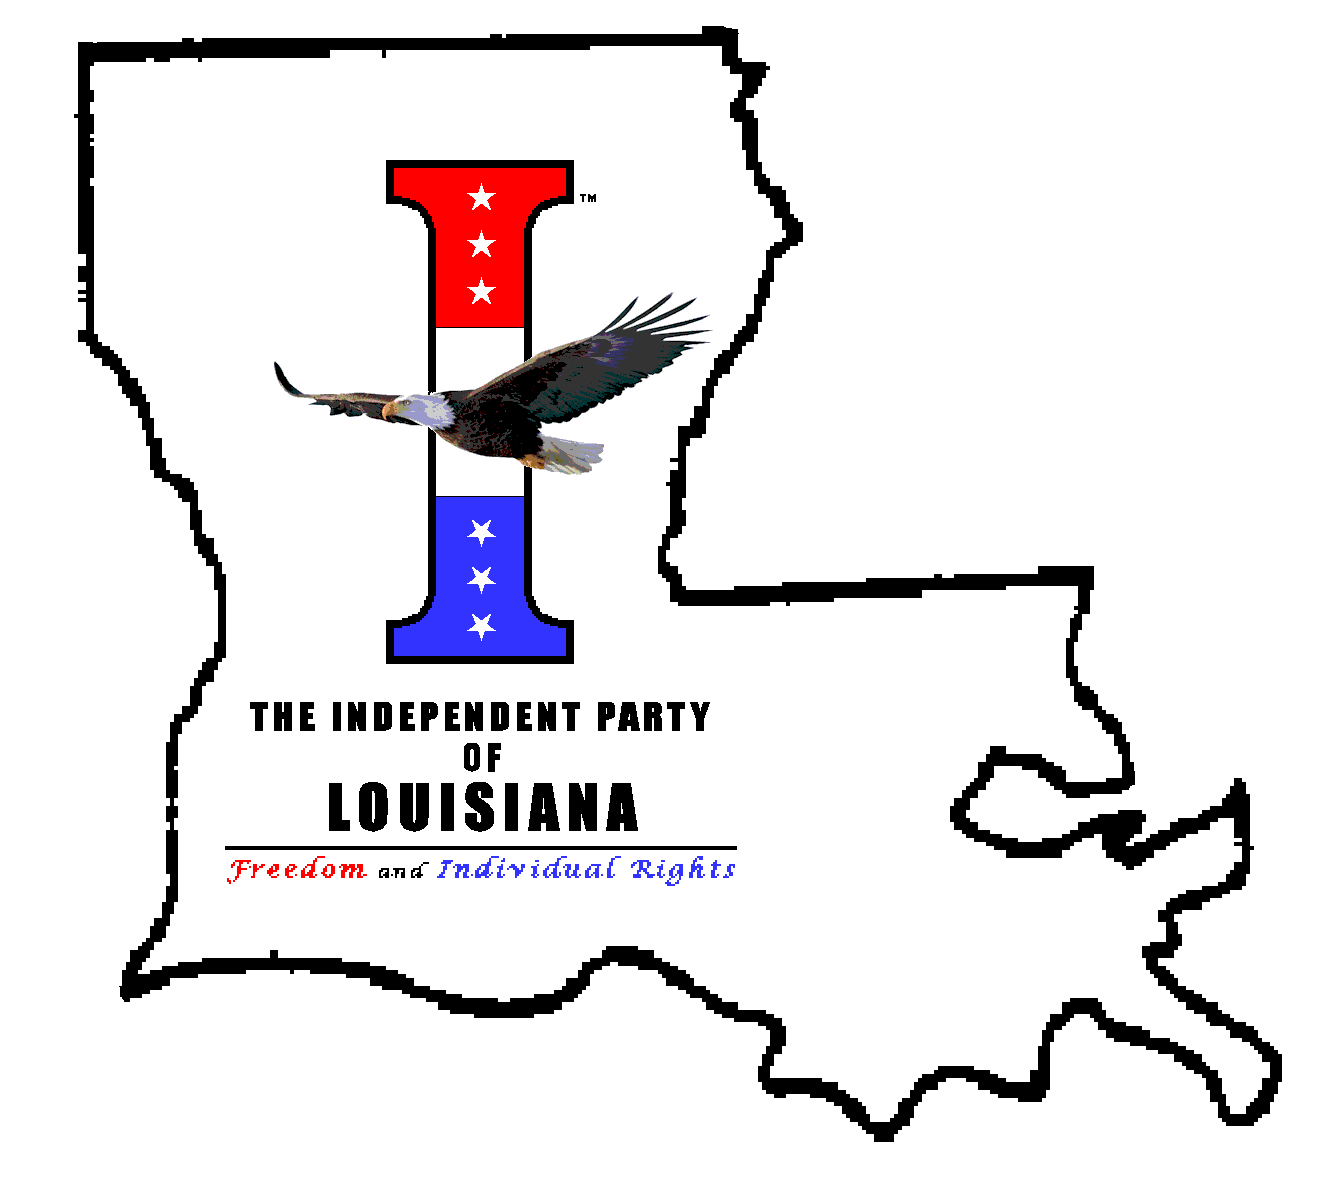 The Independent Party of Louisiana!